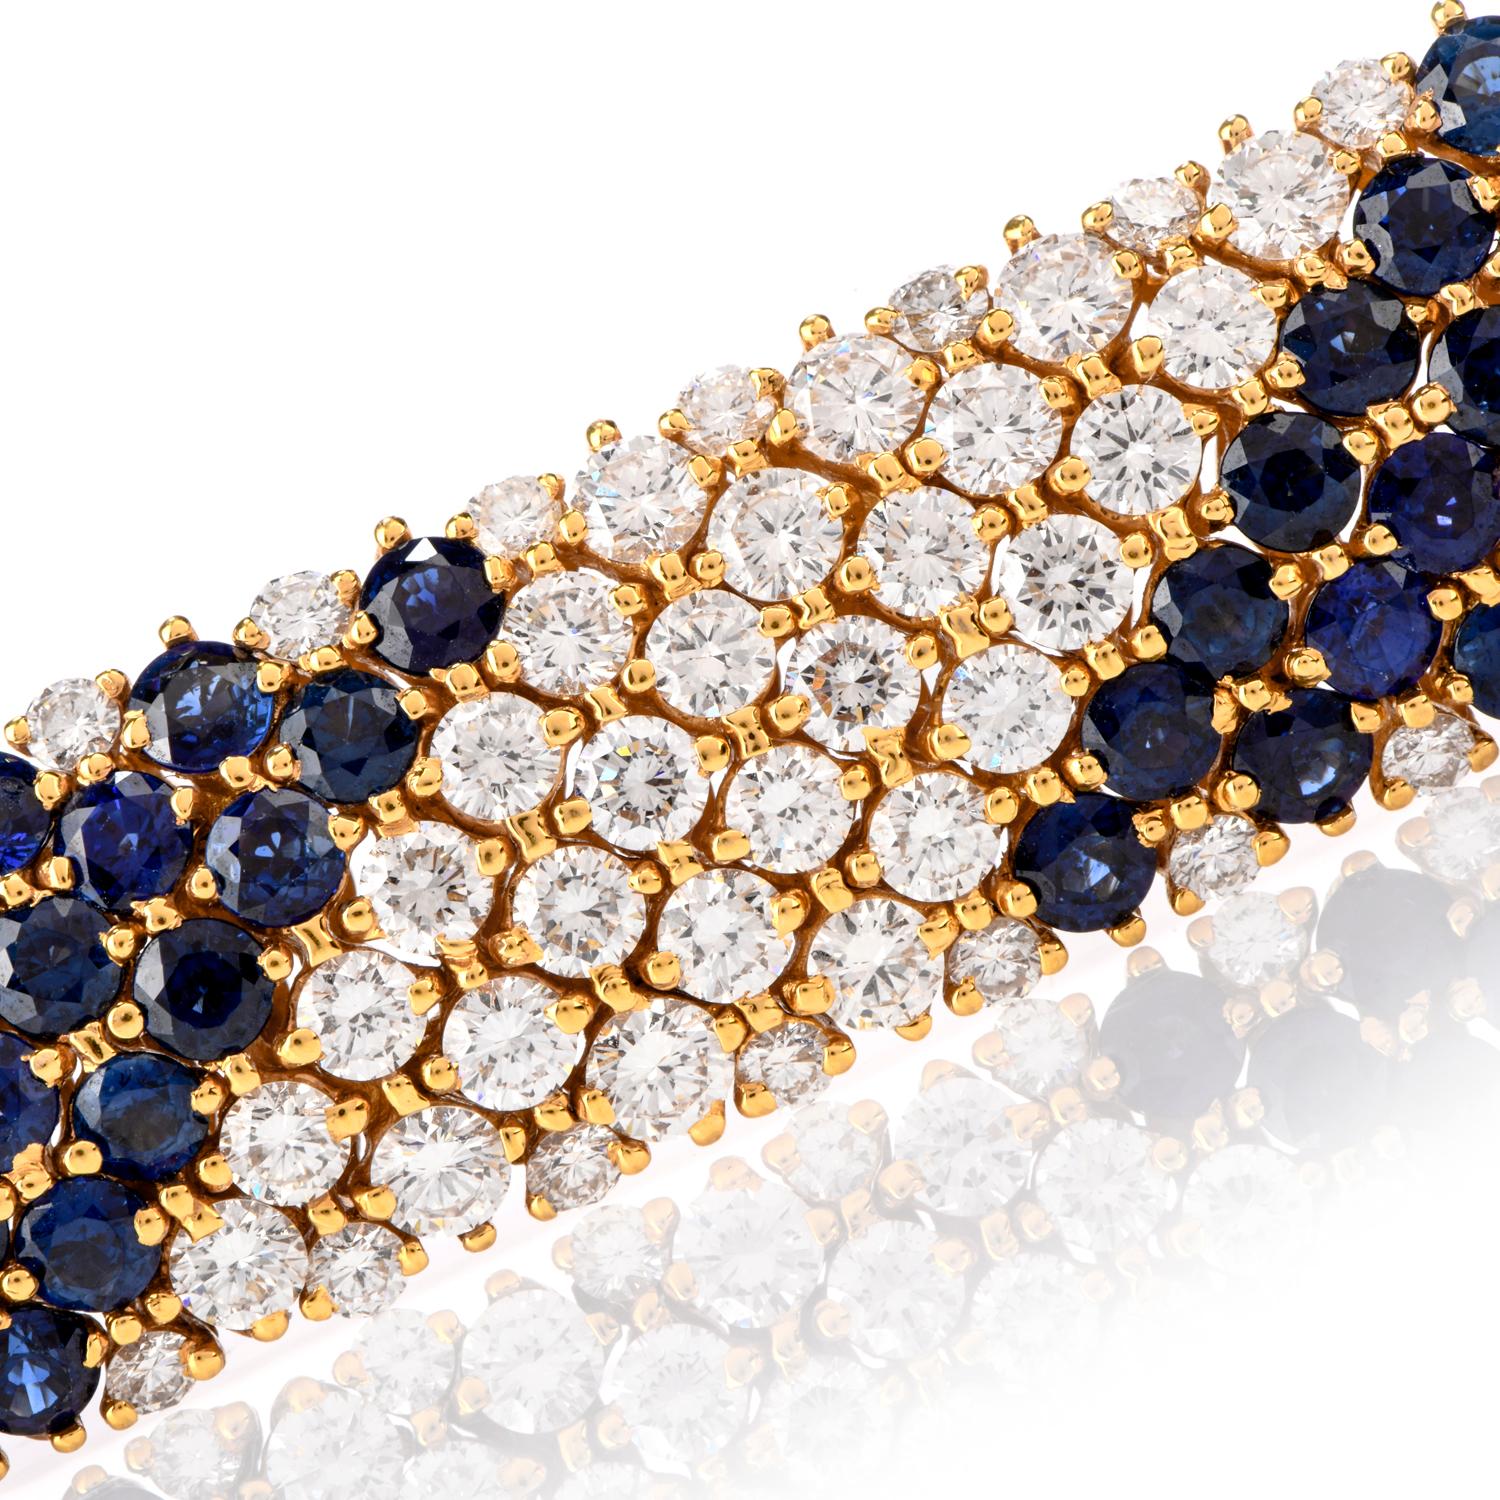 This powerful Diamond and Sapphire bracelet measuring approx. 17mm x 7 Inches was crafted in 76.4 Grams of 18K gold.

Alternating bands of diamonds and Sapphire adorn this bracelet.

166 round brilliant cut Diamonds weighing appx. 19.48 carat and